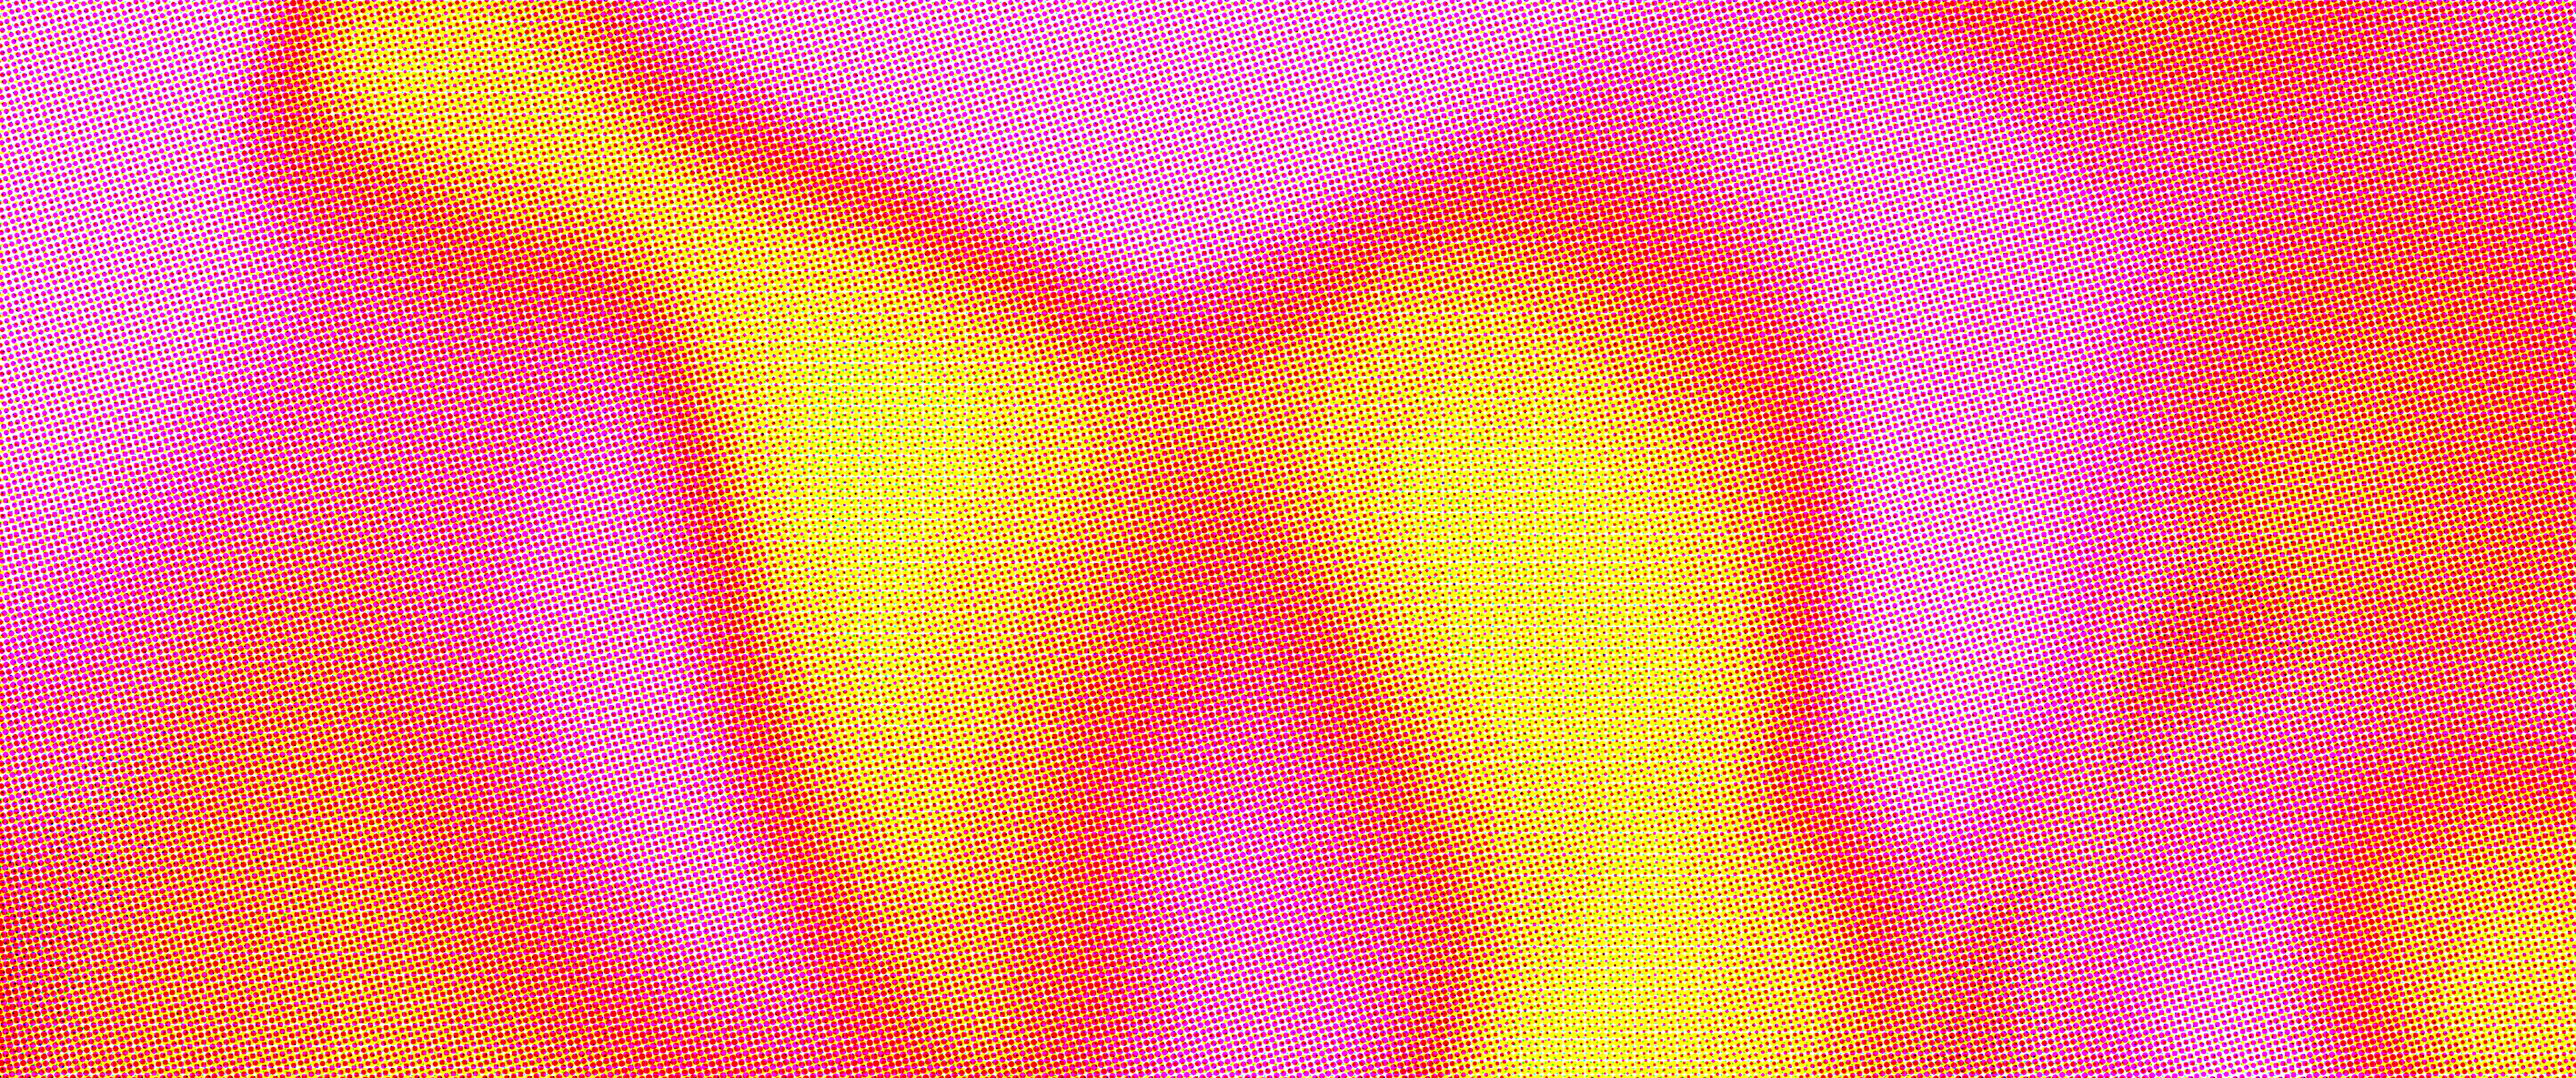 we_coded Branded Halftone Gradient, pixellated version of a heat-map looking graphic using pink, orange, and yellow.